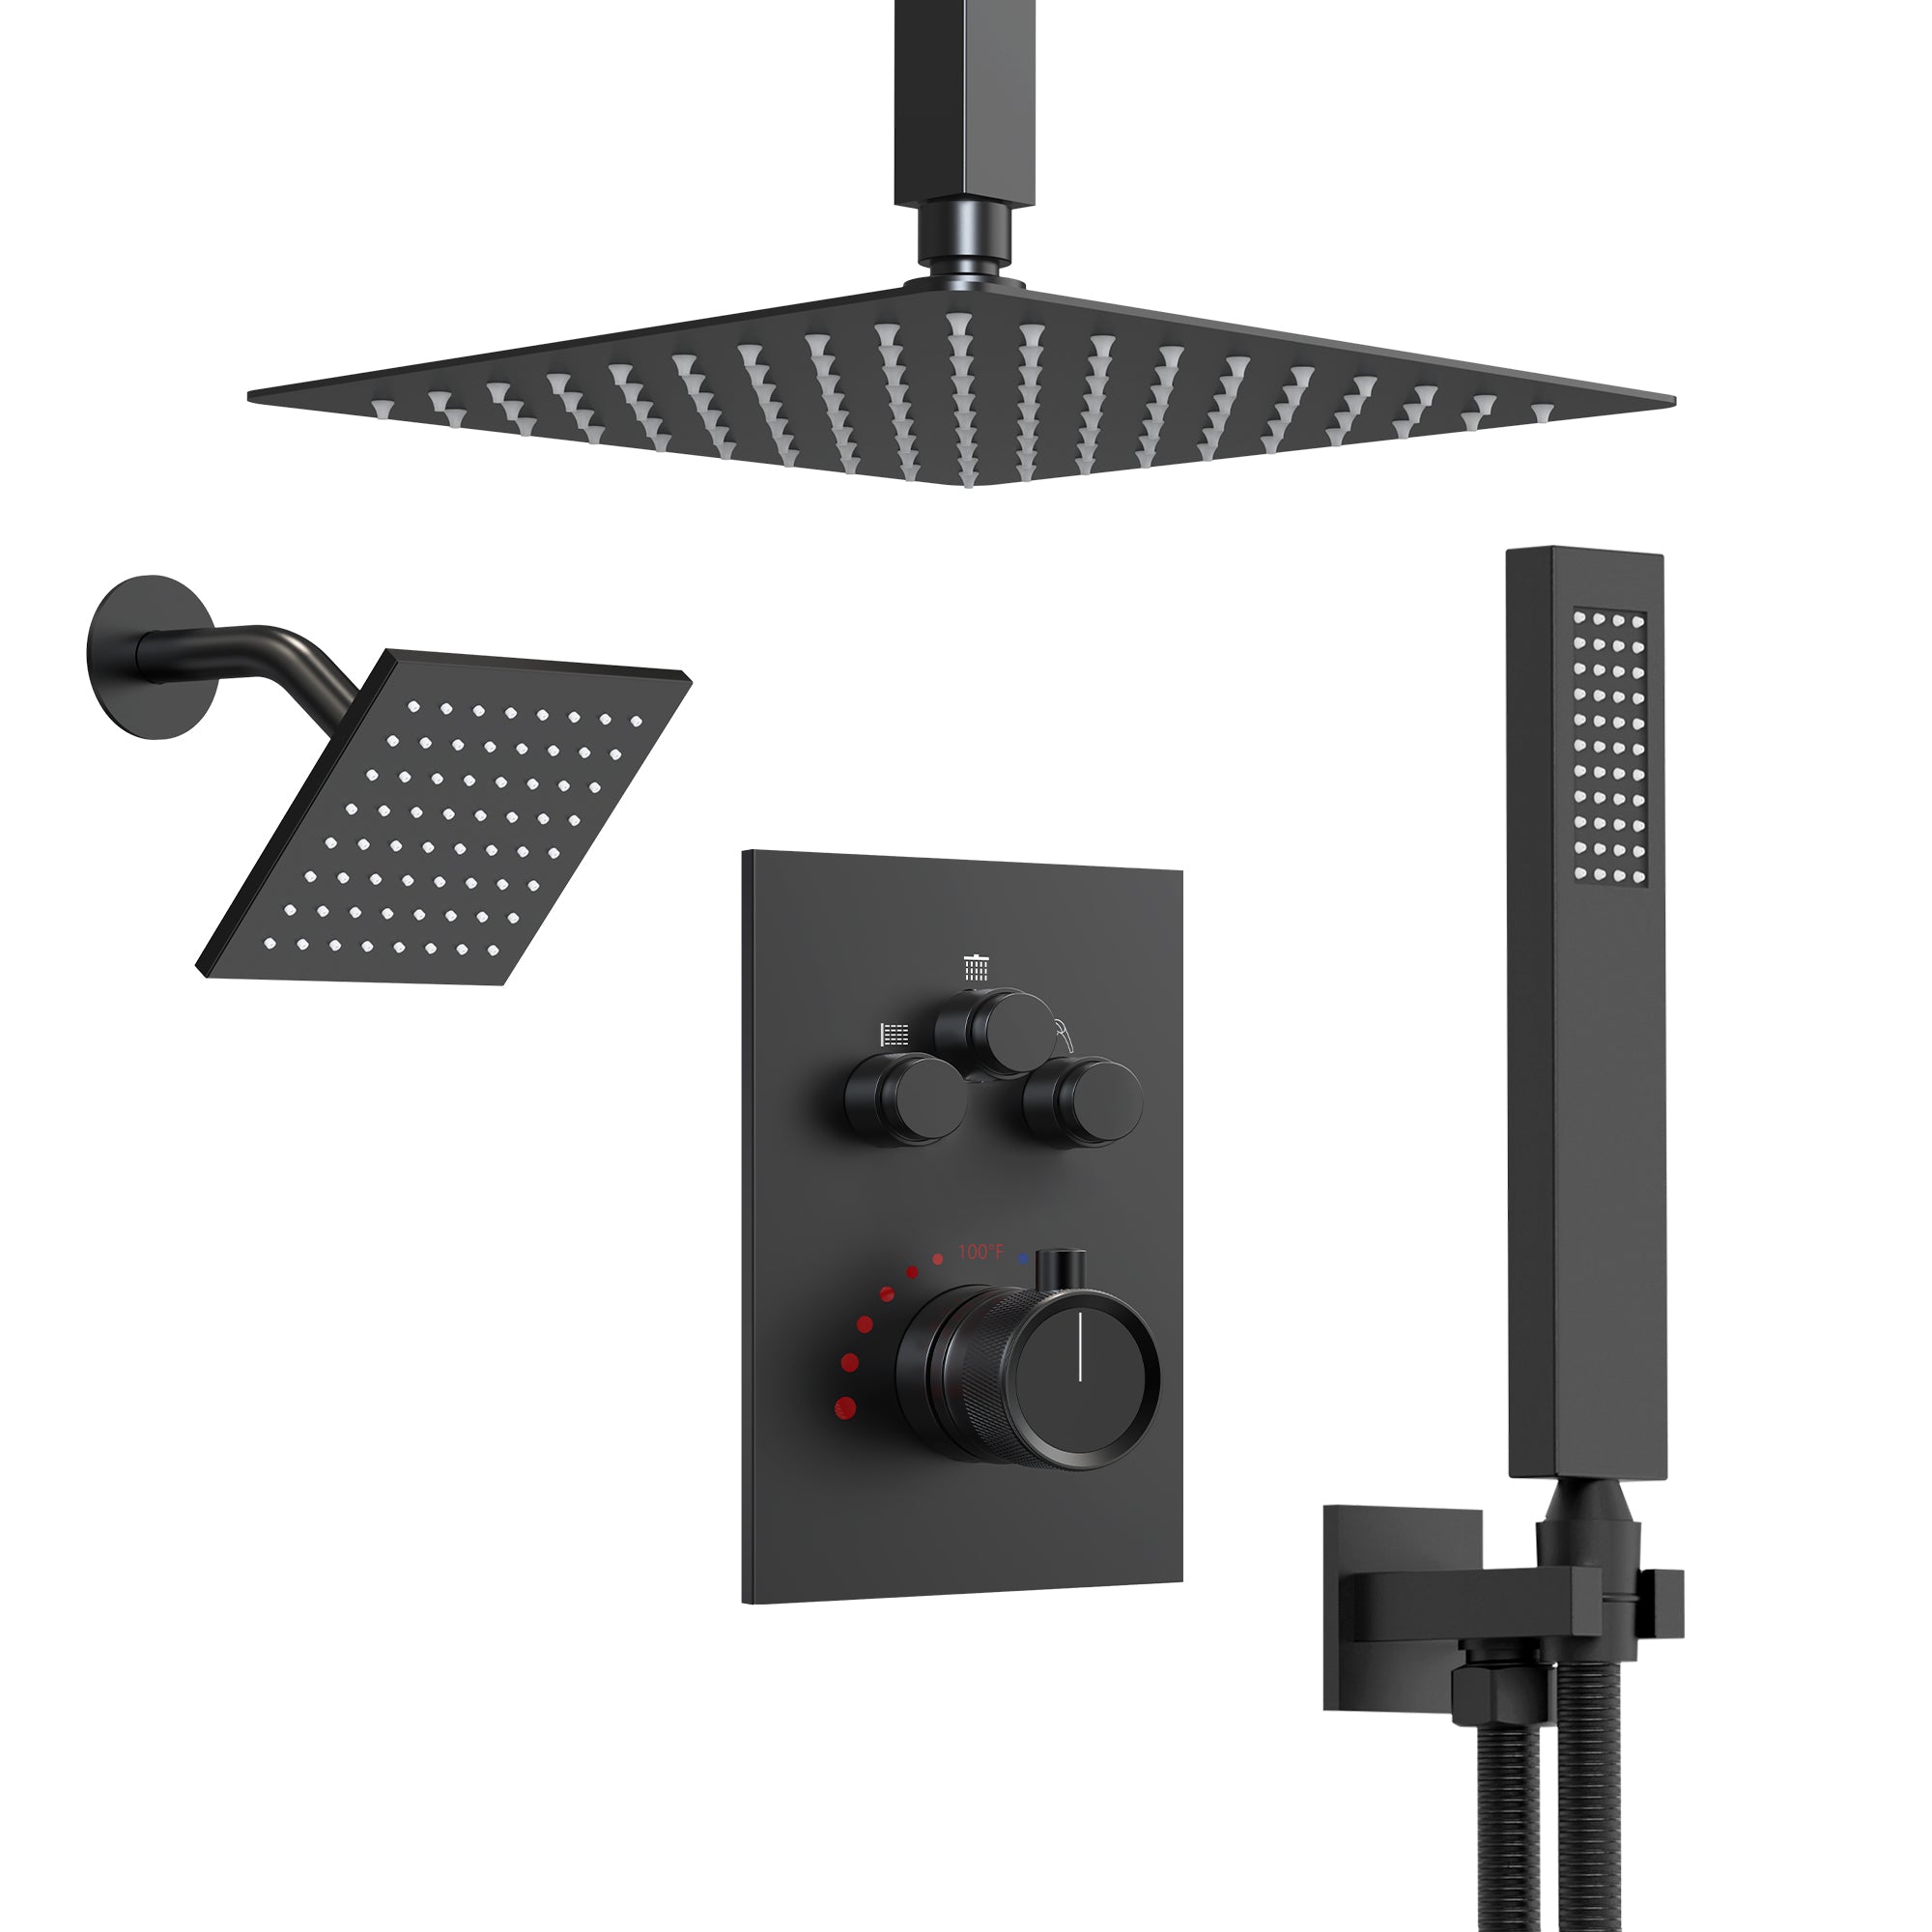 alt="Luxury Matte Black 12-inch Ceiling and Wall Mounted Rain Shower Faucet System for Modern Bathrooms_jpg"